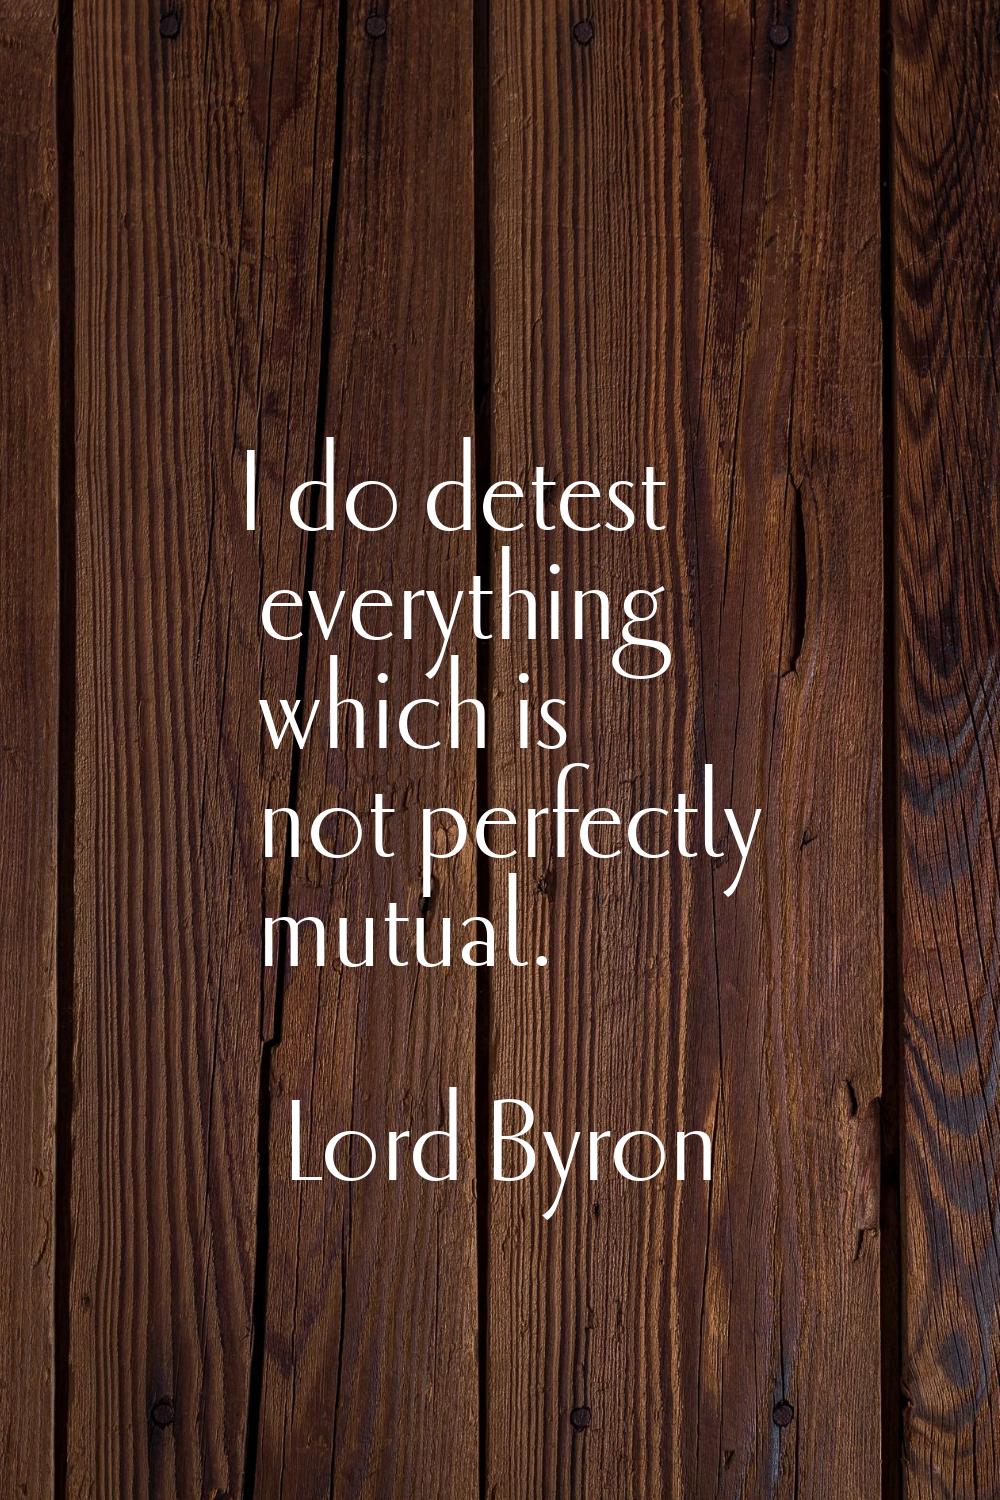 I do detest everything which is not perfectly mutual.